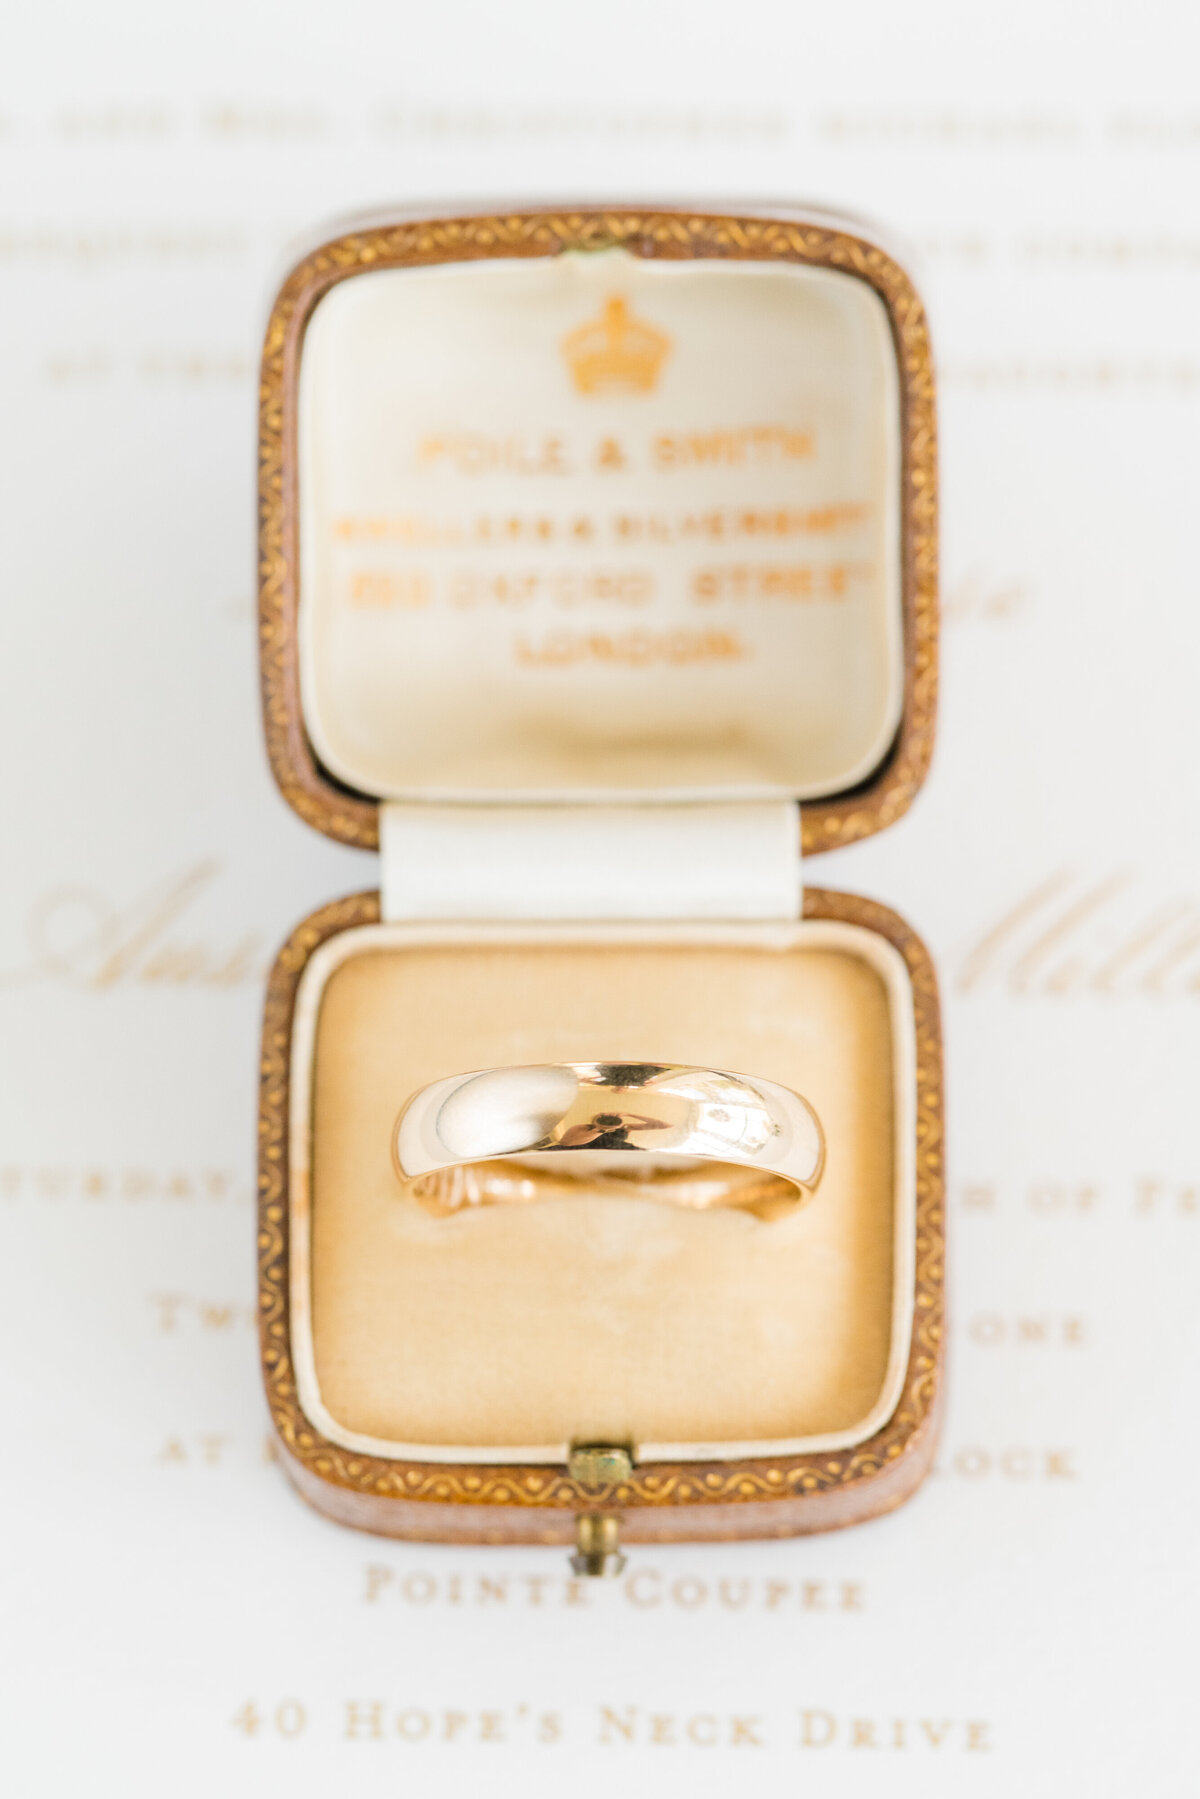 Groom's gold ring from a Veuve-inspired wedding at Palmetto Bluff in Charleston, SC | photographed by destination wedding photographer Dana Cubbage.